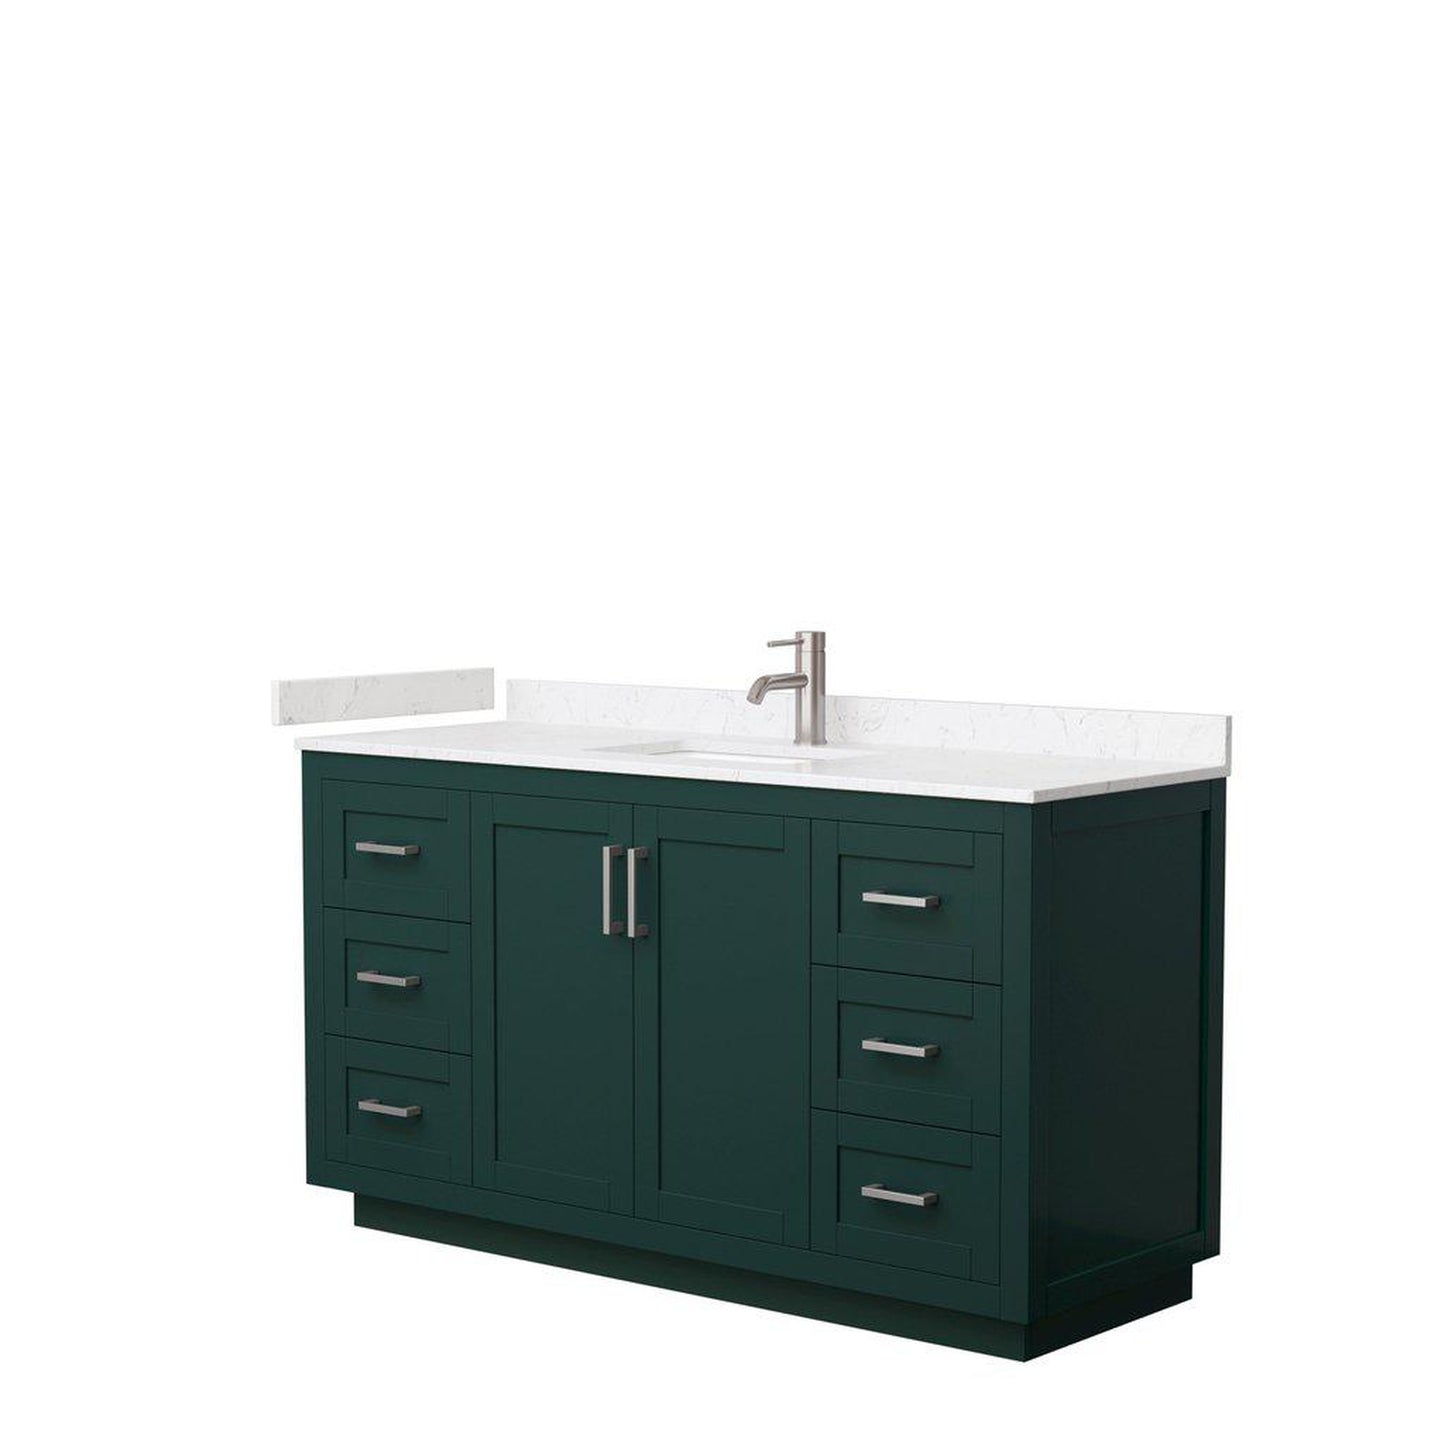 Wyndham Collection Miranda 60" Single Bathroom Green Vanity Set With Light-Vein Carrara Cultured Marble Countertop, Undermount Square Sink, And Brushed Nickel Trim